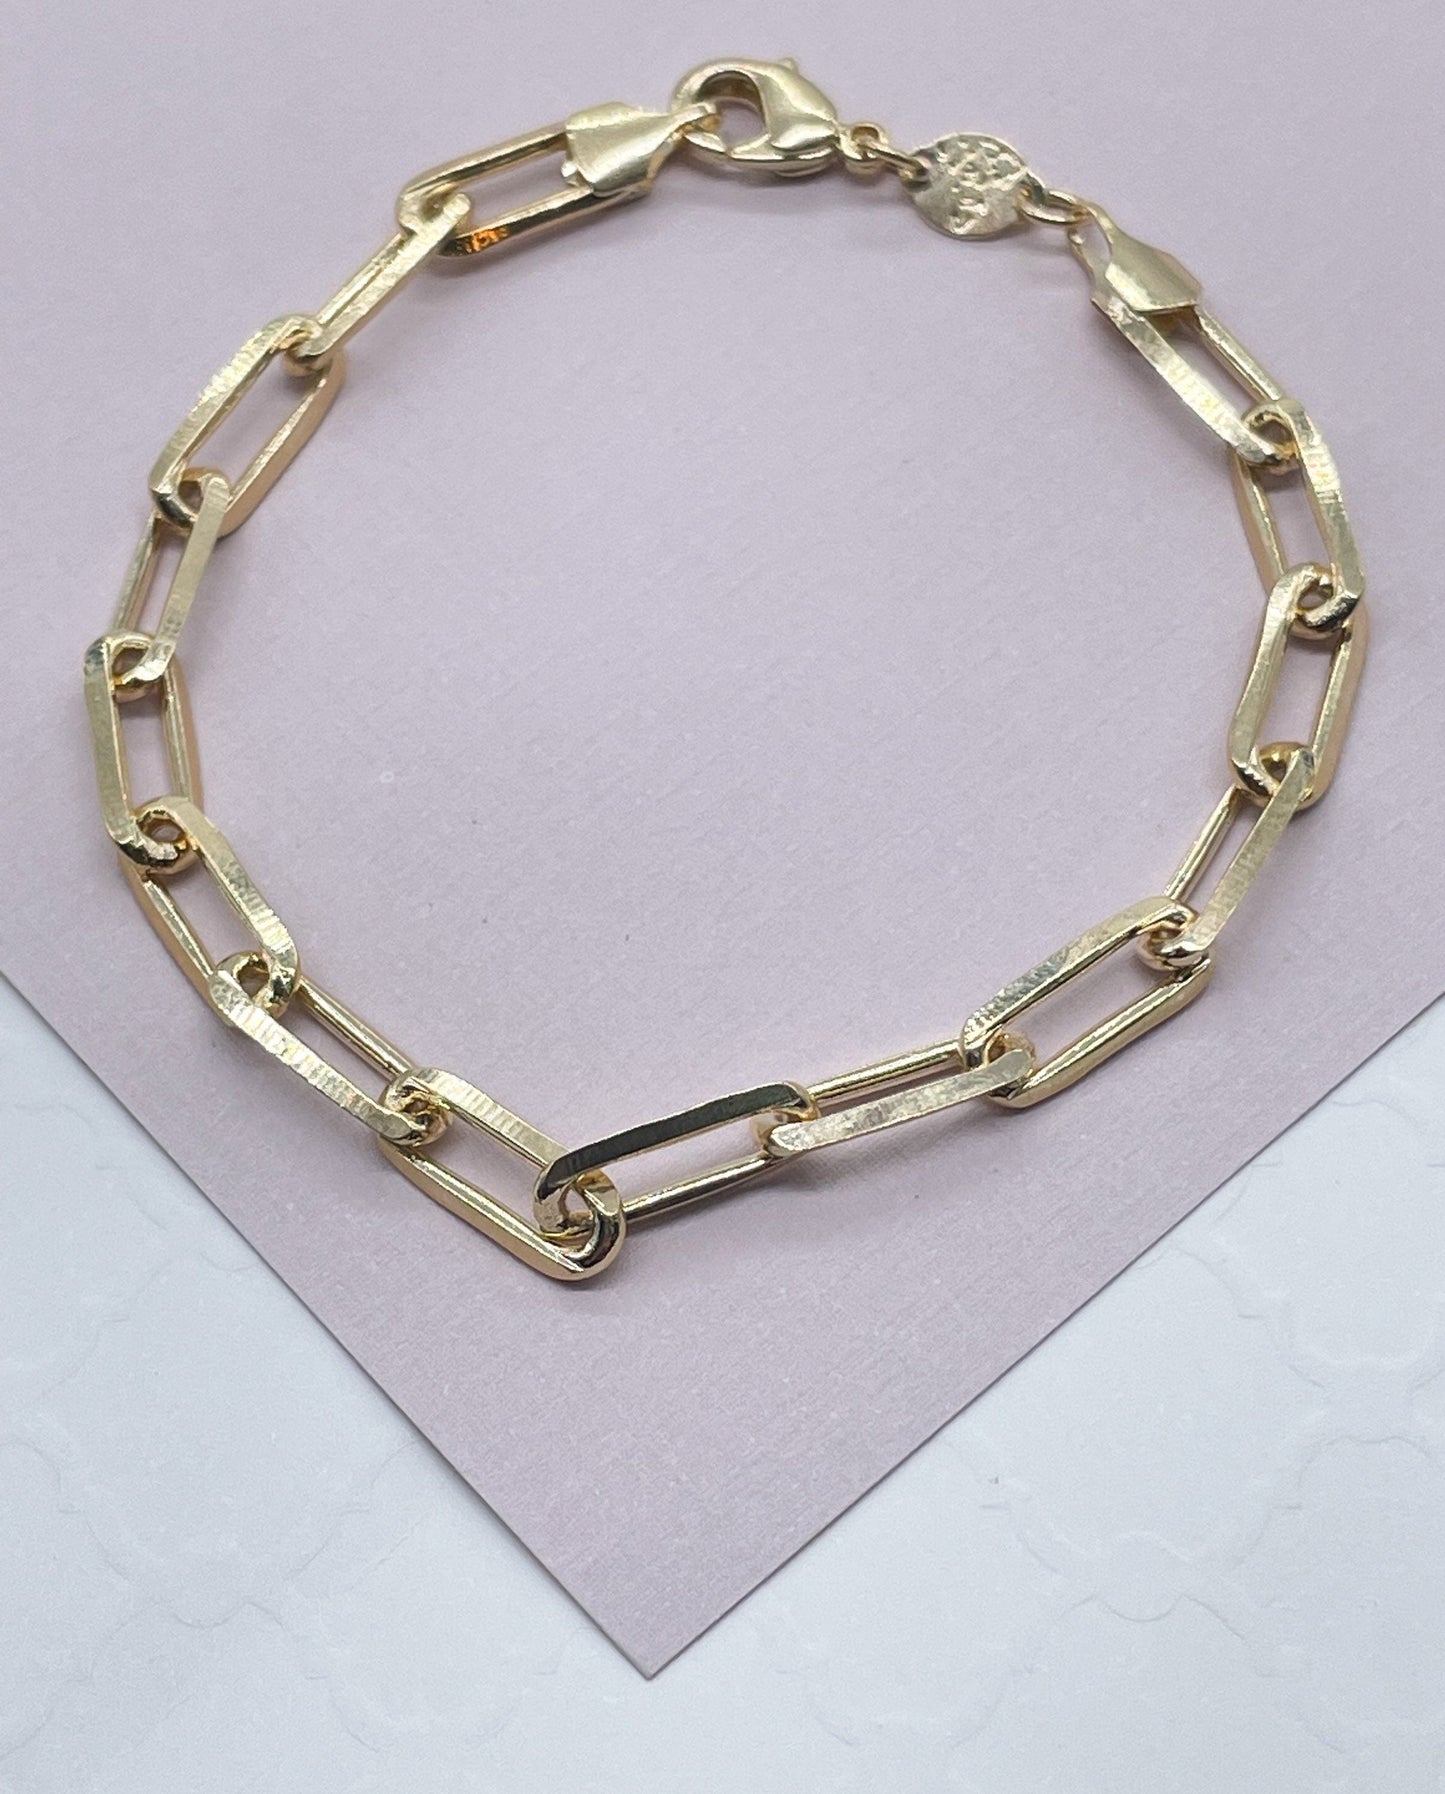 Vintage Style Paper Clip Chain in 18k Gold Layered Necklace or Bracelet Wholesale